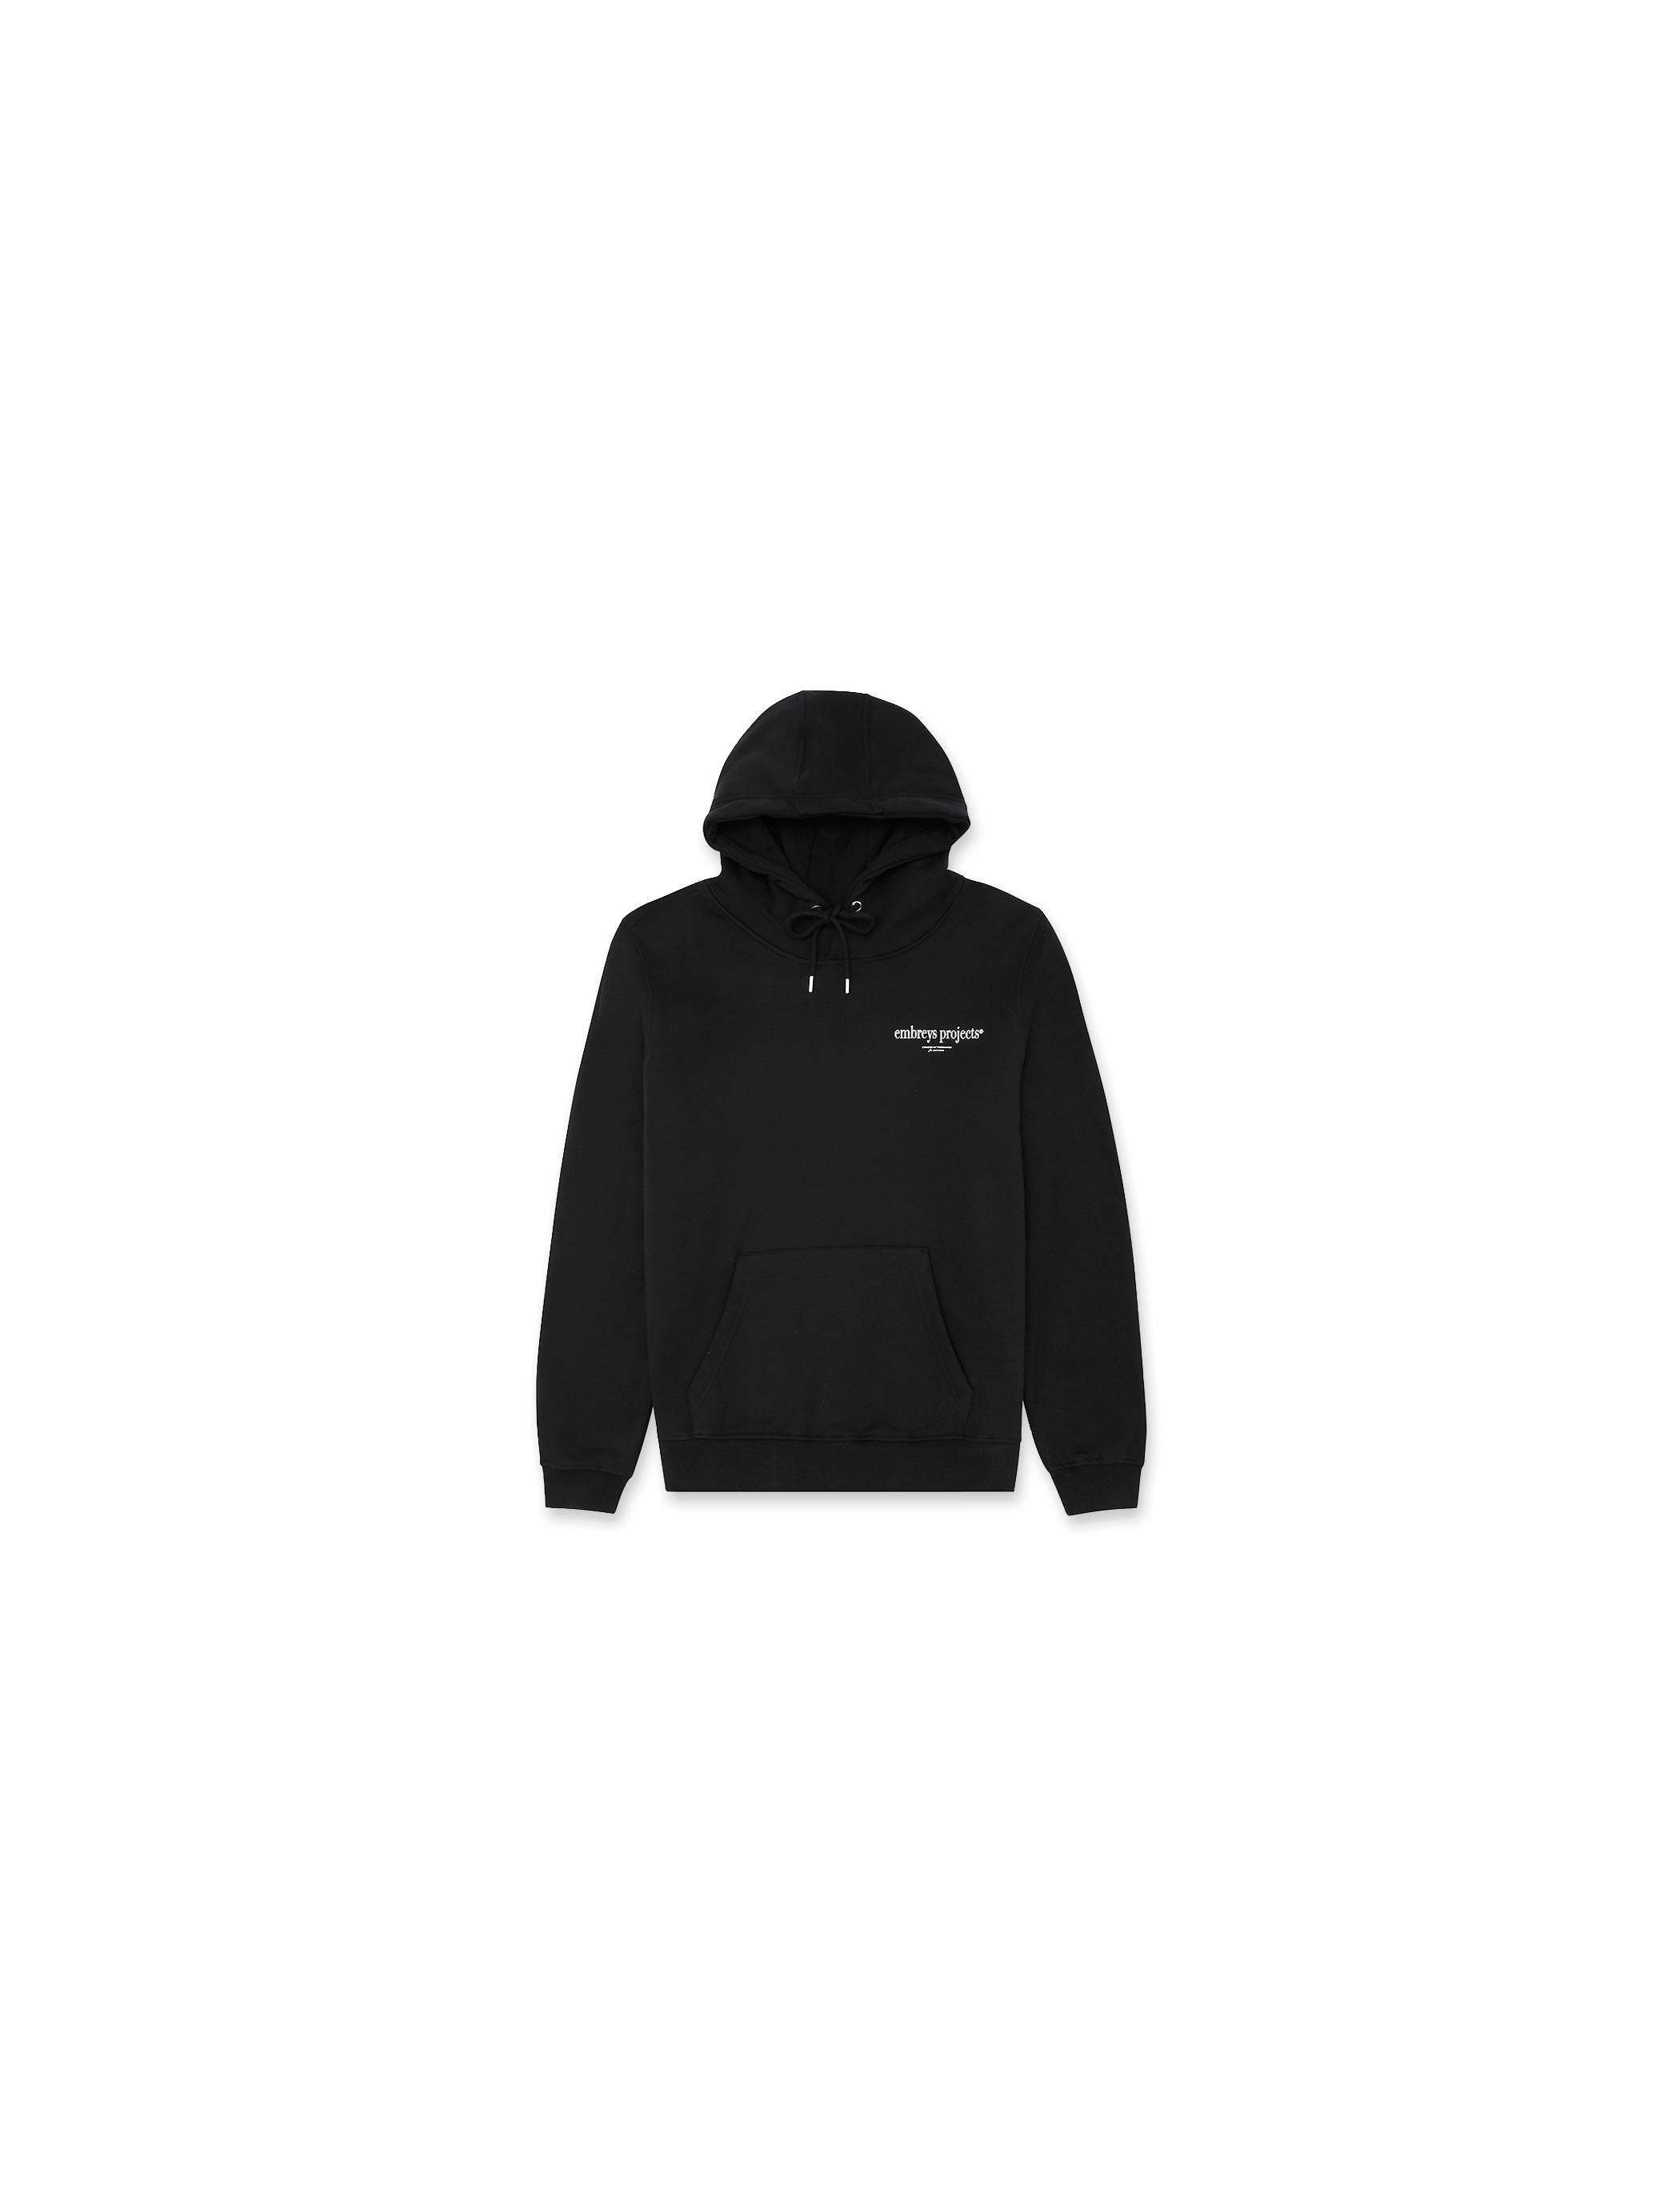 REFLECTION HOODIE - BLACK (W) - Embreys Projects